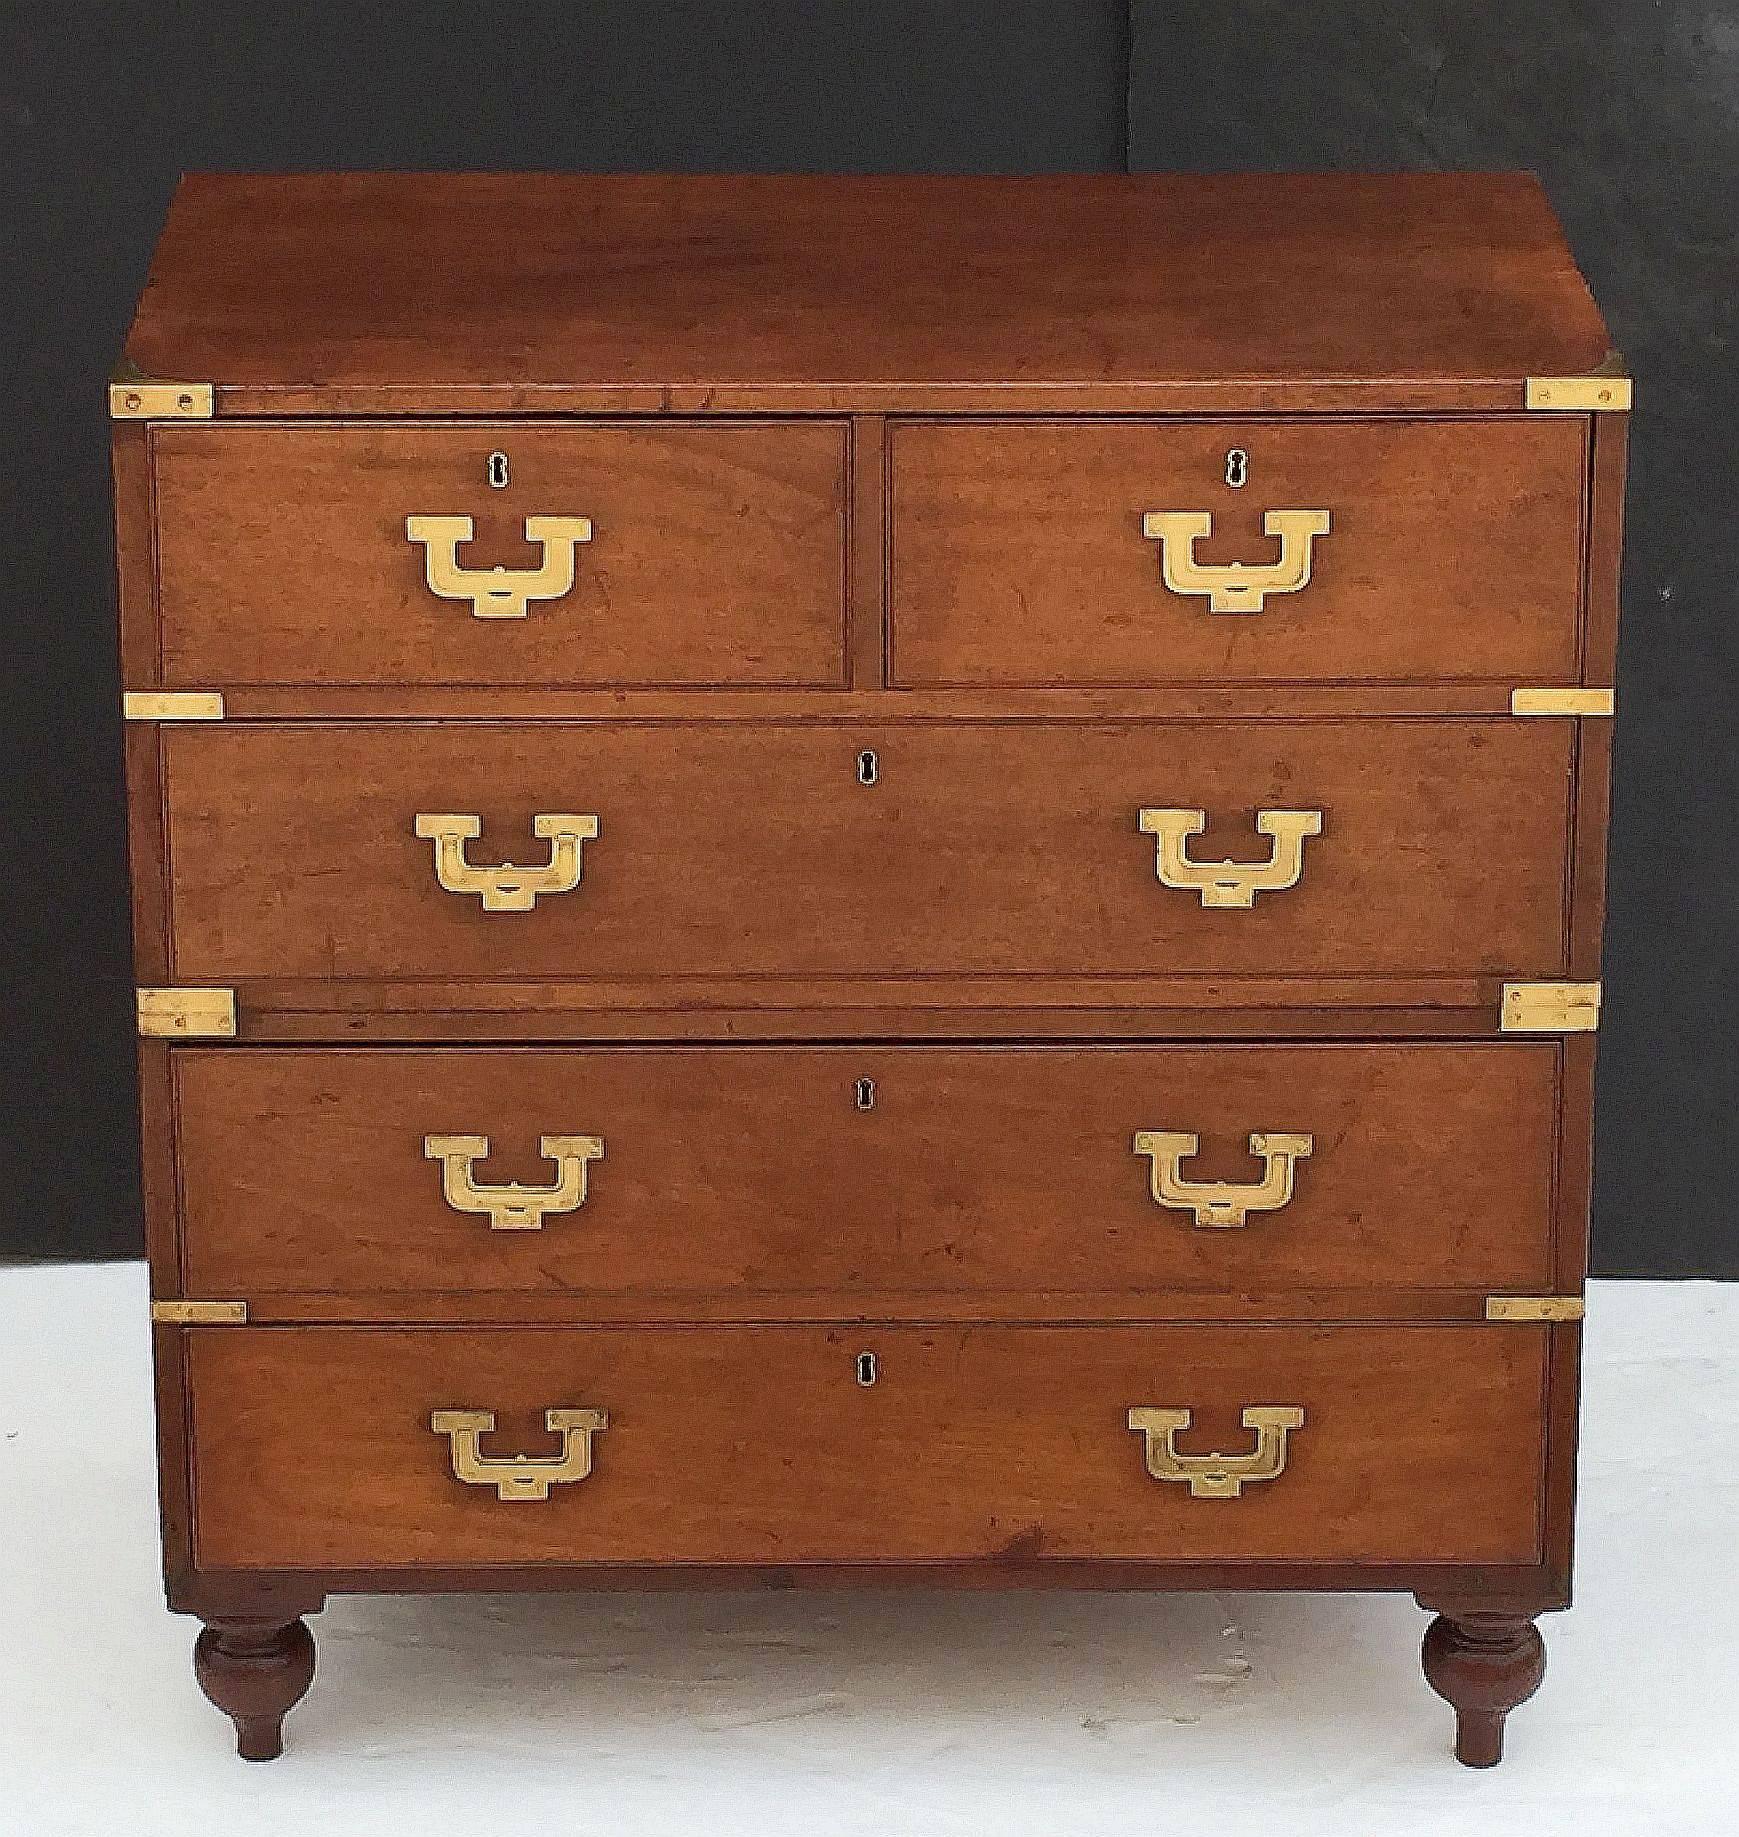 A fine English military officer’s Campaign Ware chest, featuring a handsome teak exterior, showing two short drawers over three long drawers. The brass-bound chest, in two parts, accented with brass hardware and porter’s handles, resting on shaped